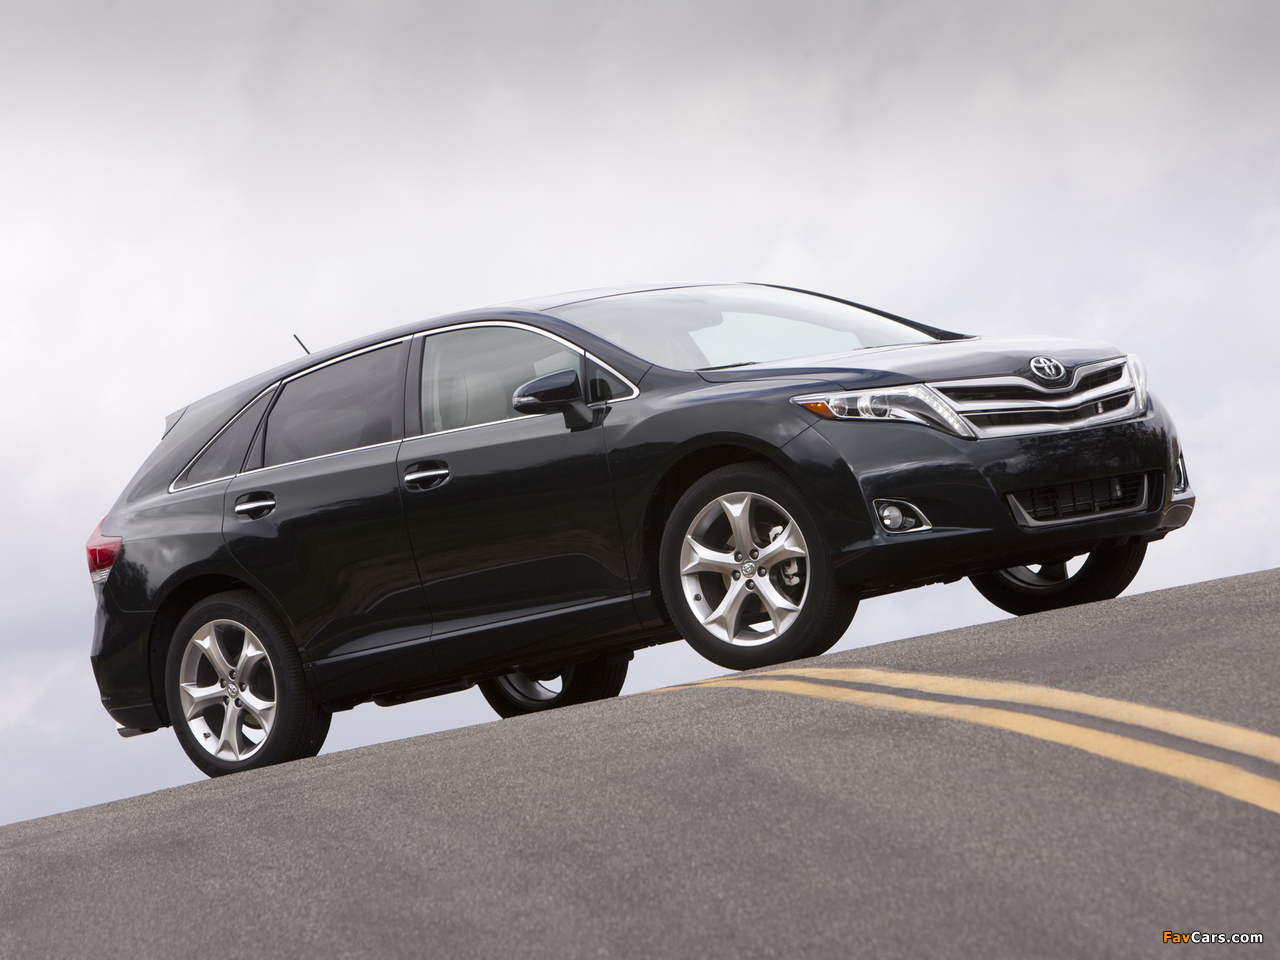 Toyota Venza 2012 images (1280 x 960)